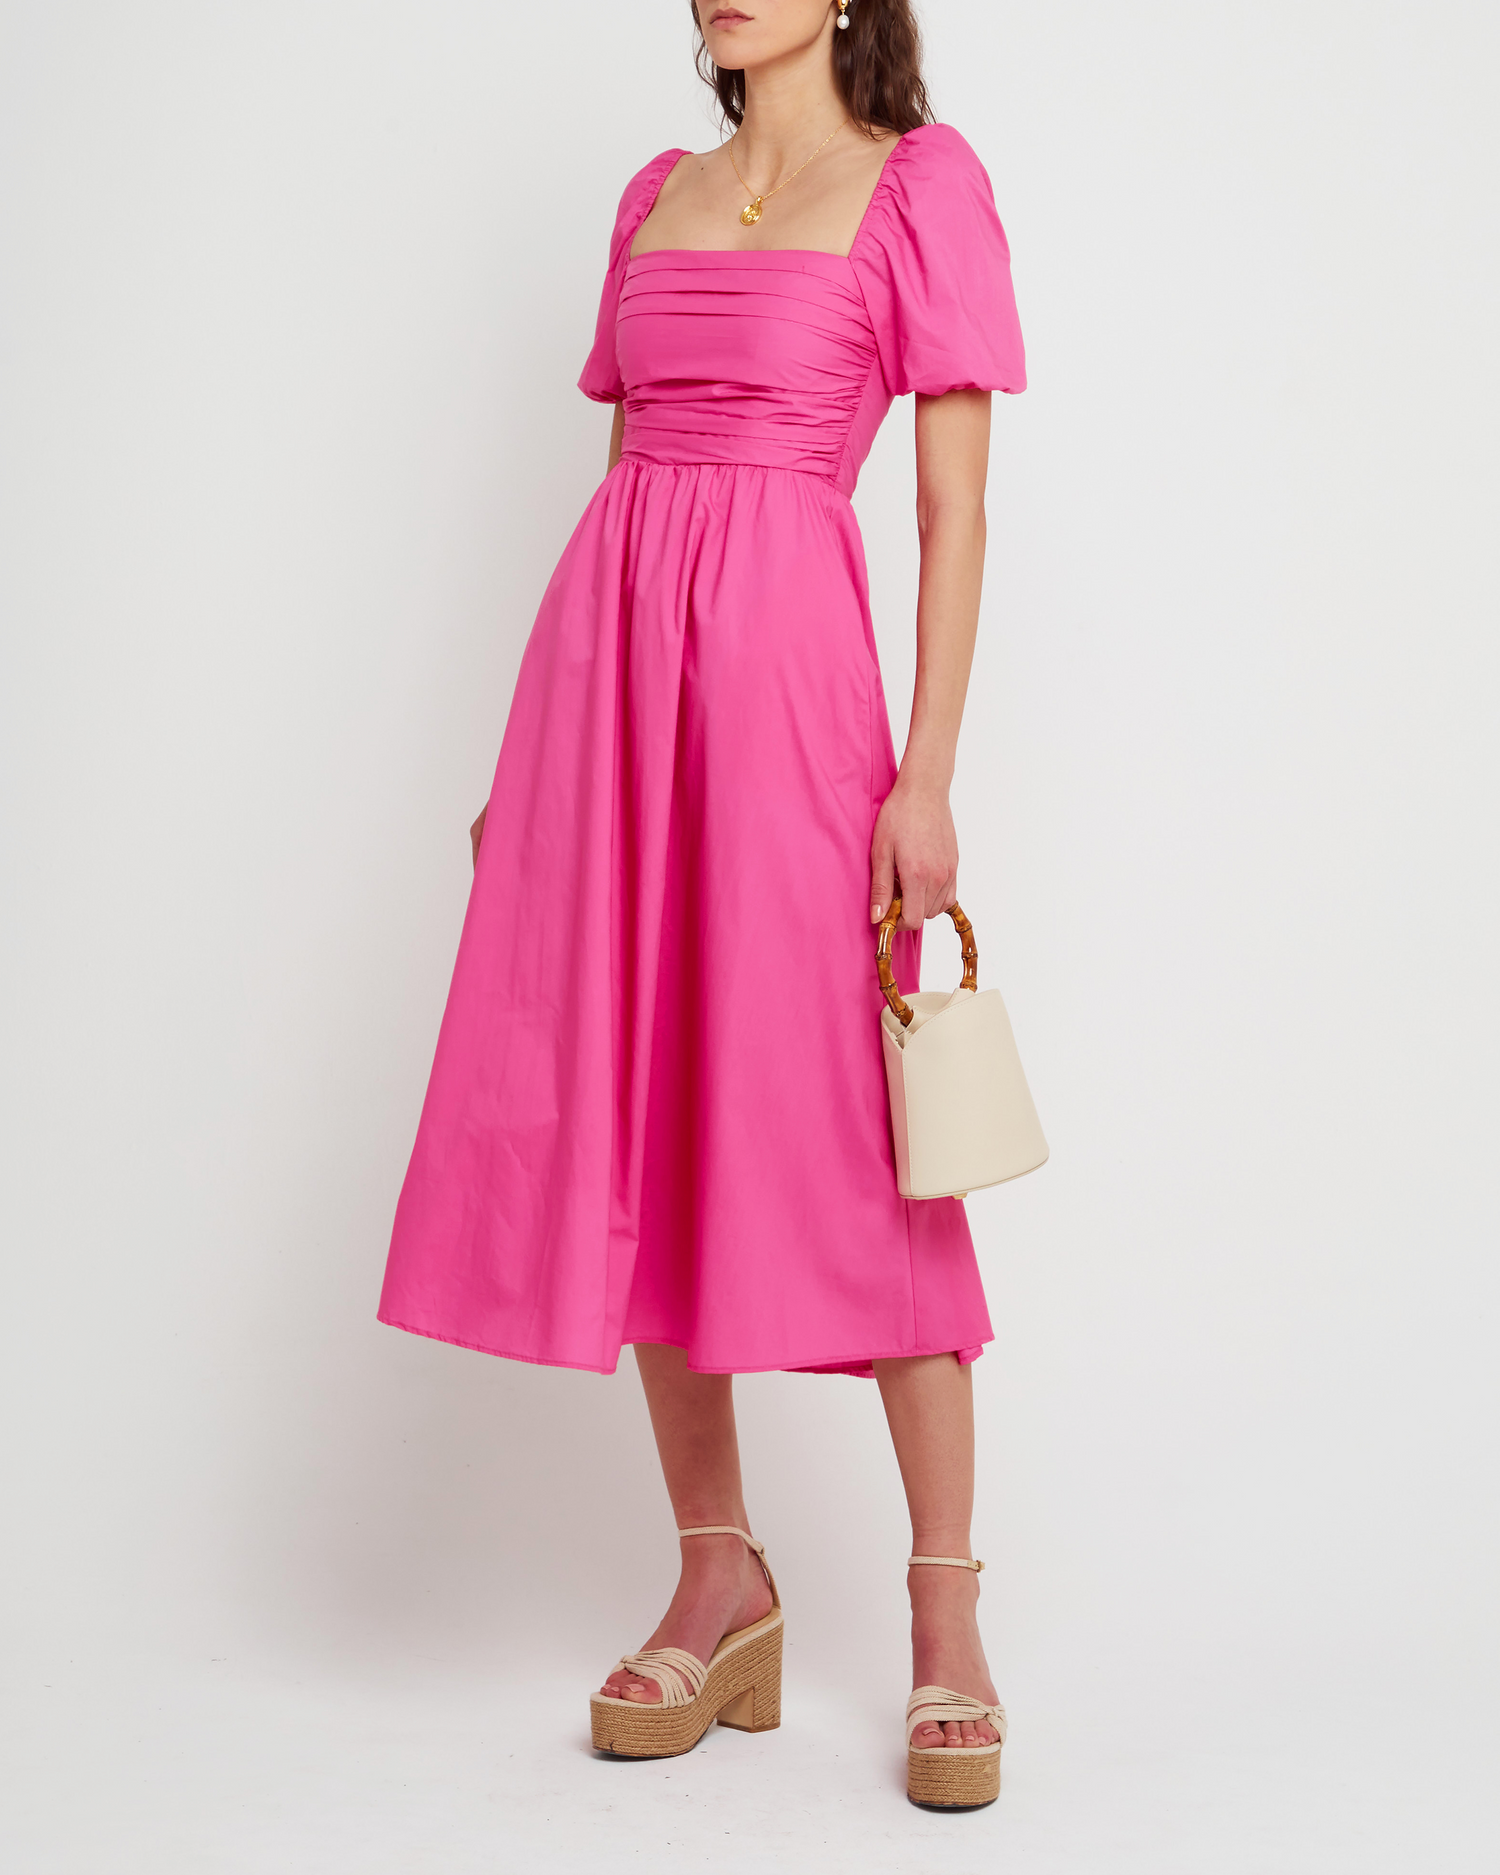 Fourth image of River Dress, a pink midi dress, square neckline, short puff sleeves, gathered bodice